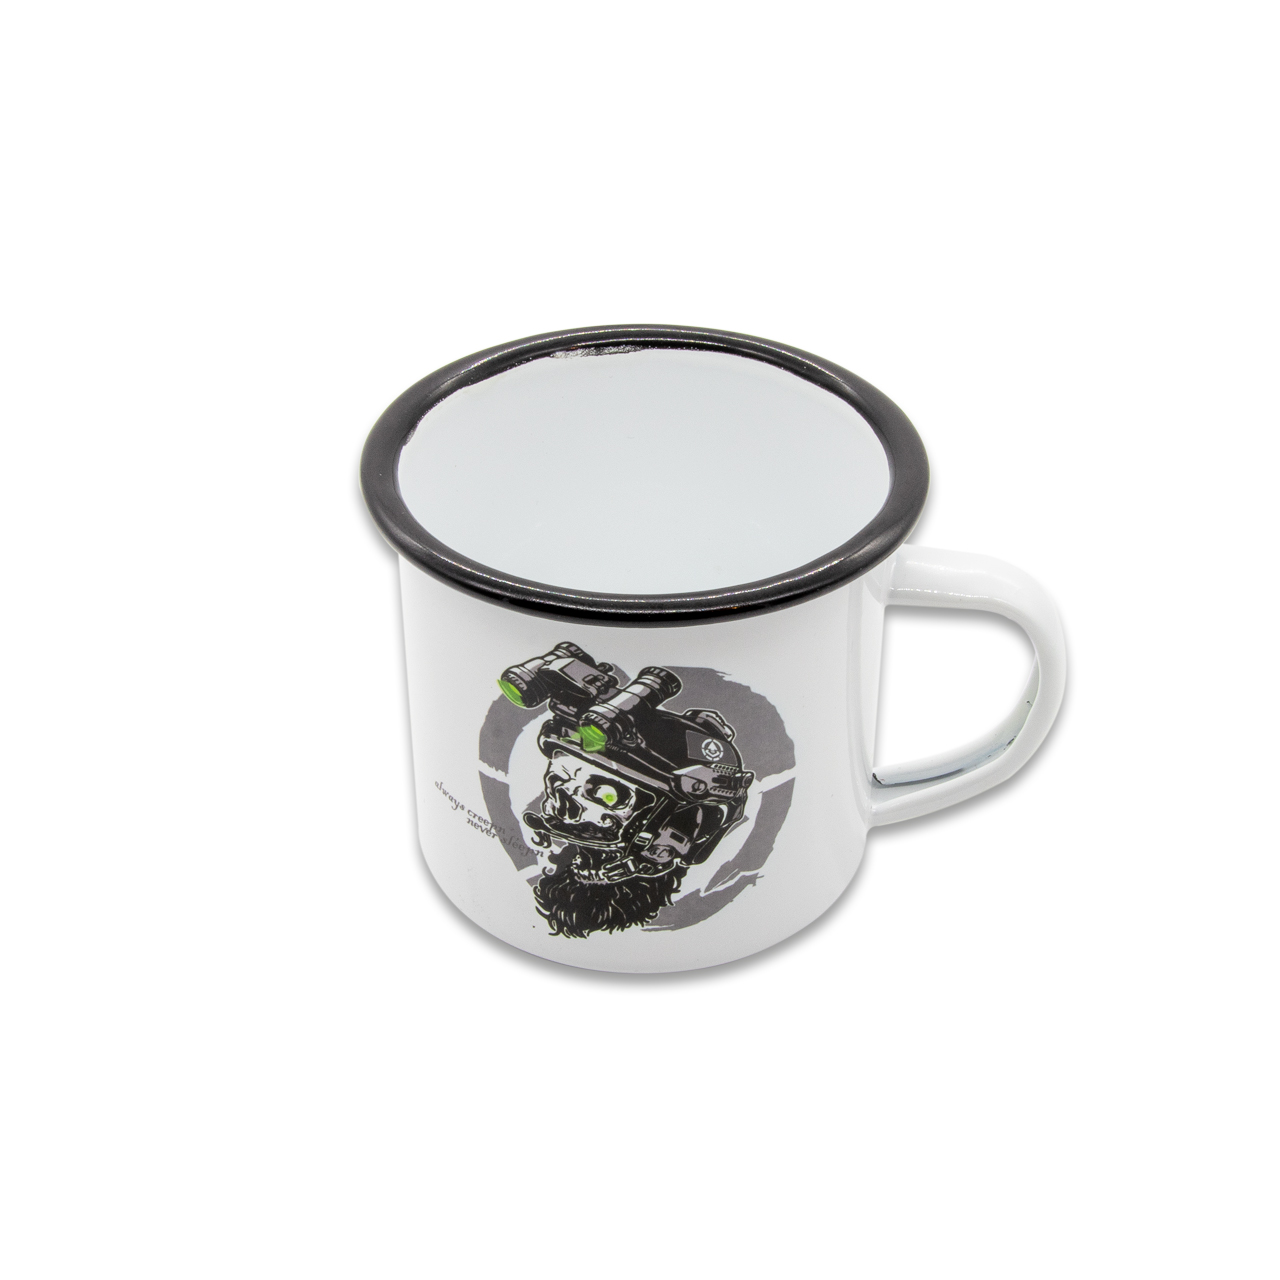 Tasse Emaille "FORTUNE FAVORS THE BRAVE"  300ml